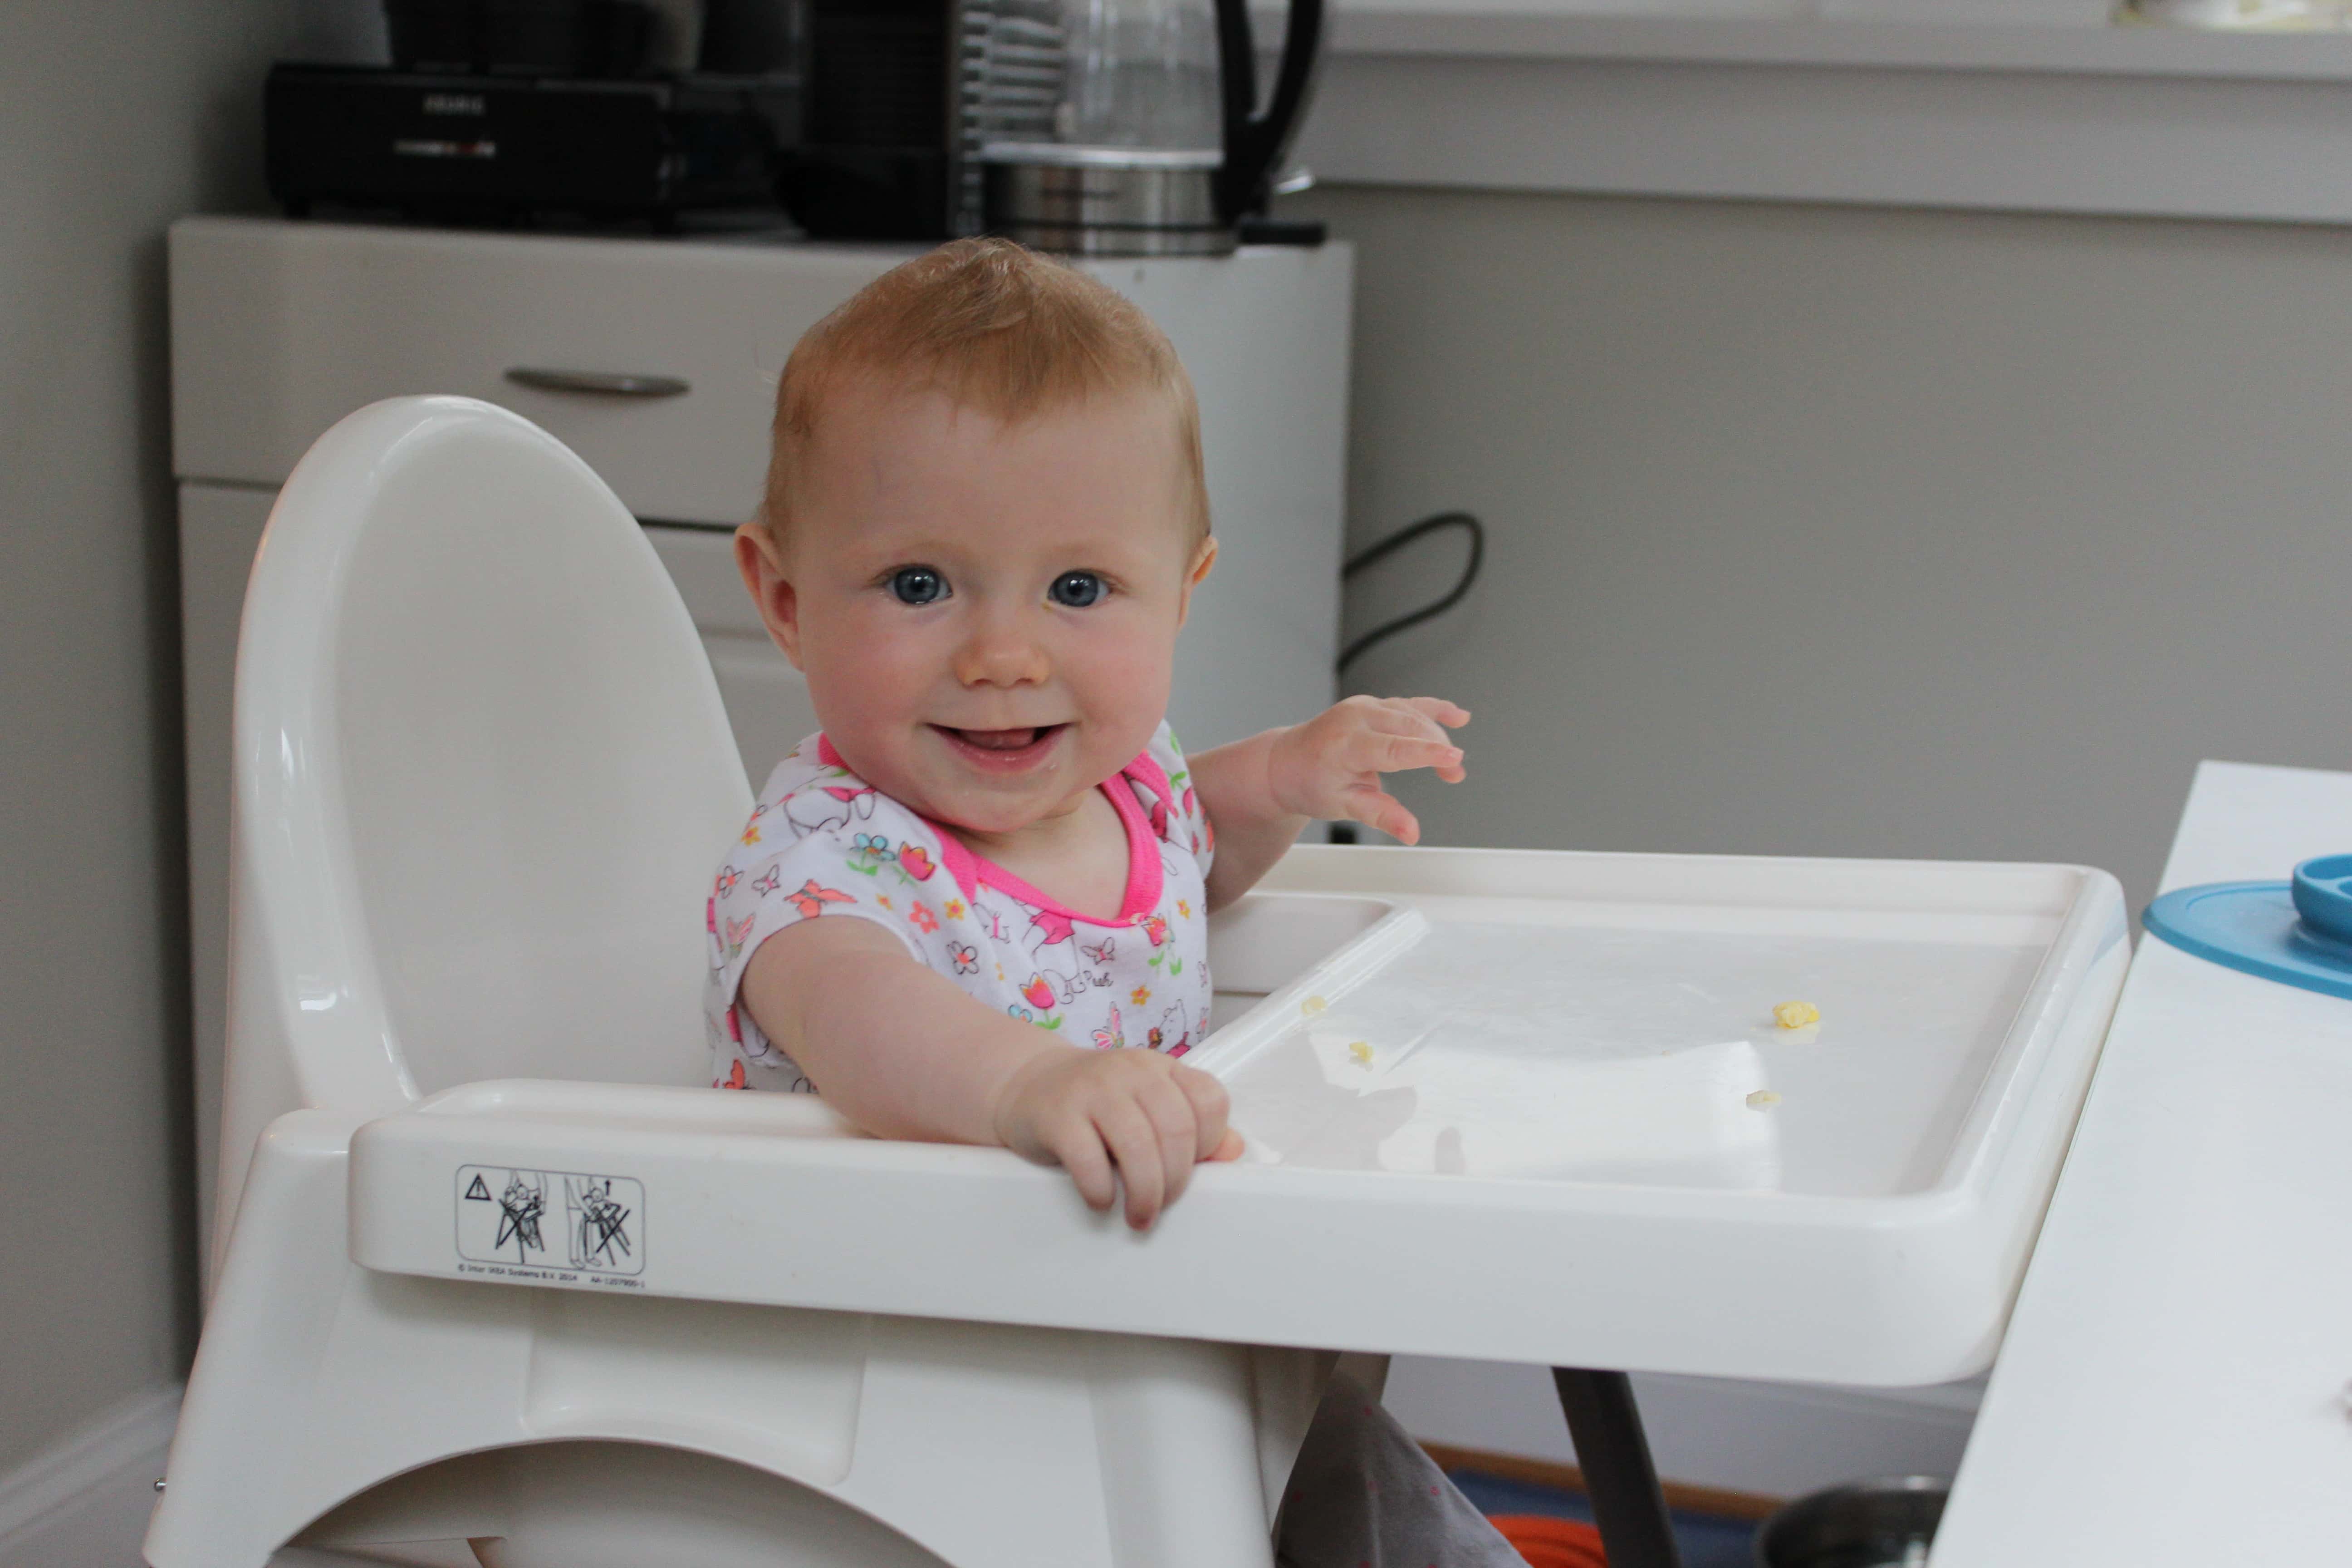 Baby-led weaning approaches learning through food, for mothers and